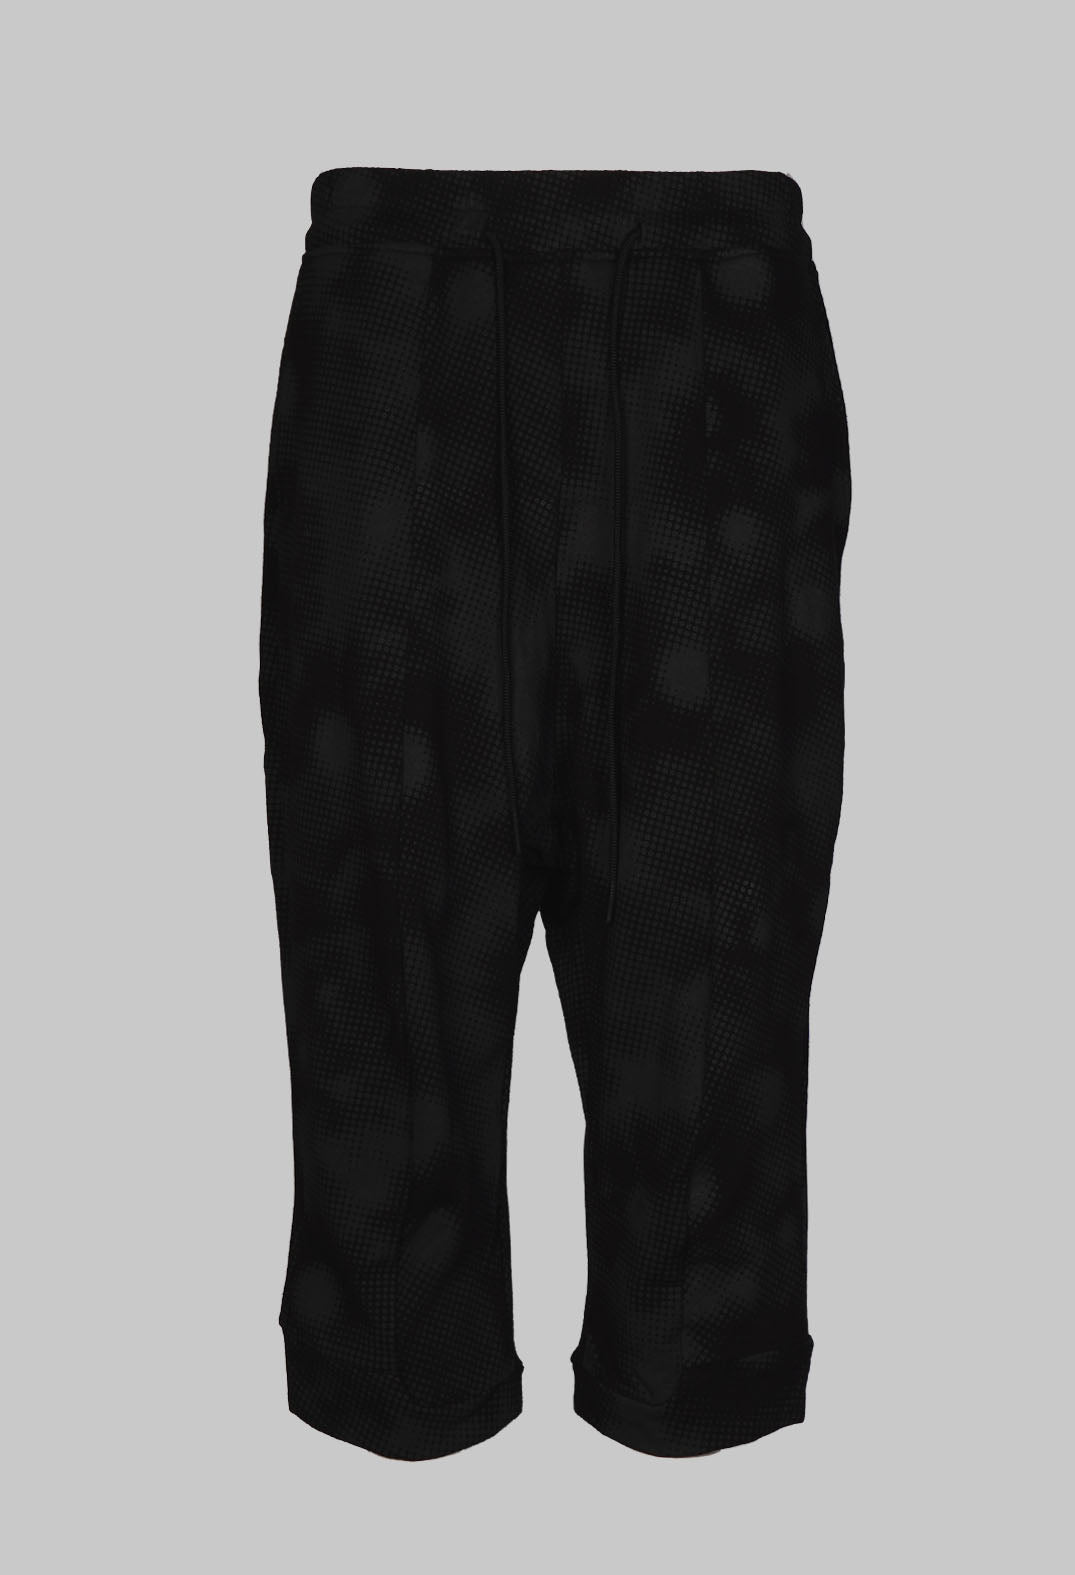 Cropped Flower Joggers in Black Print